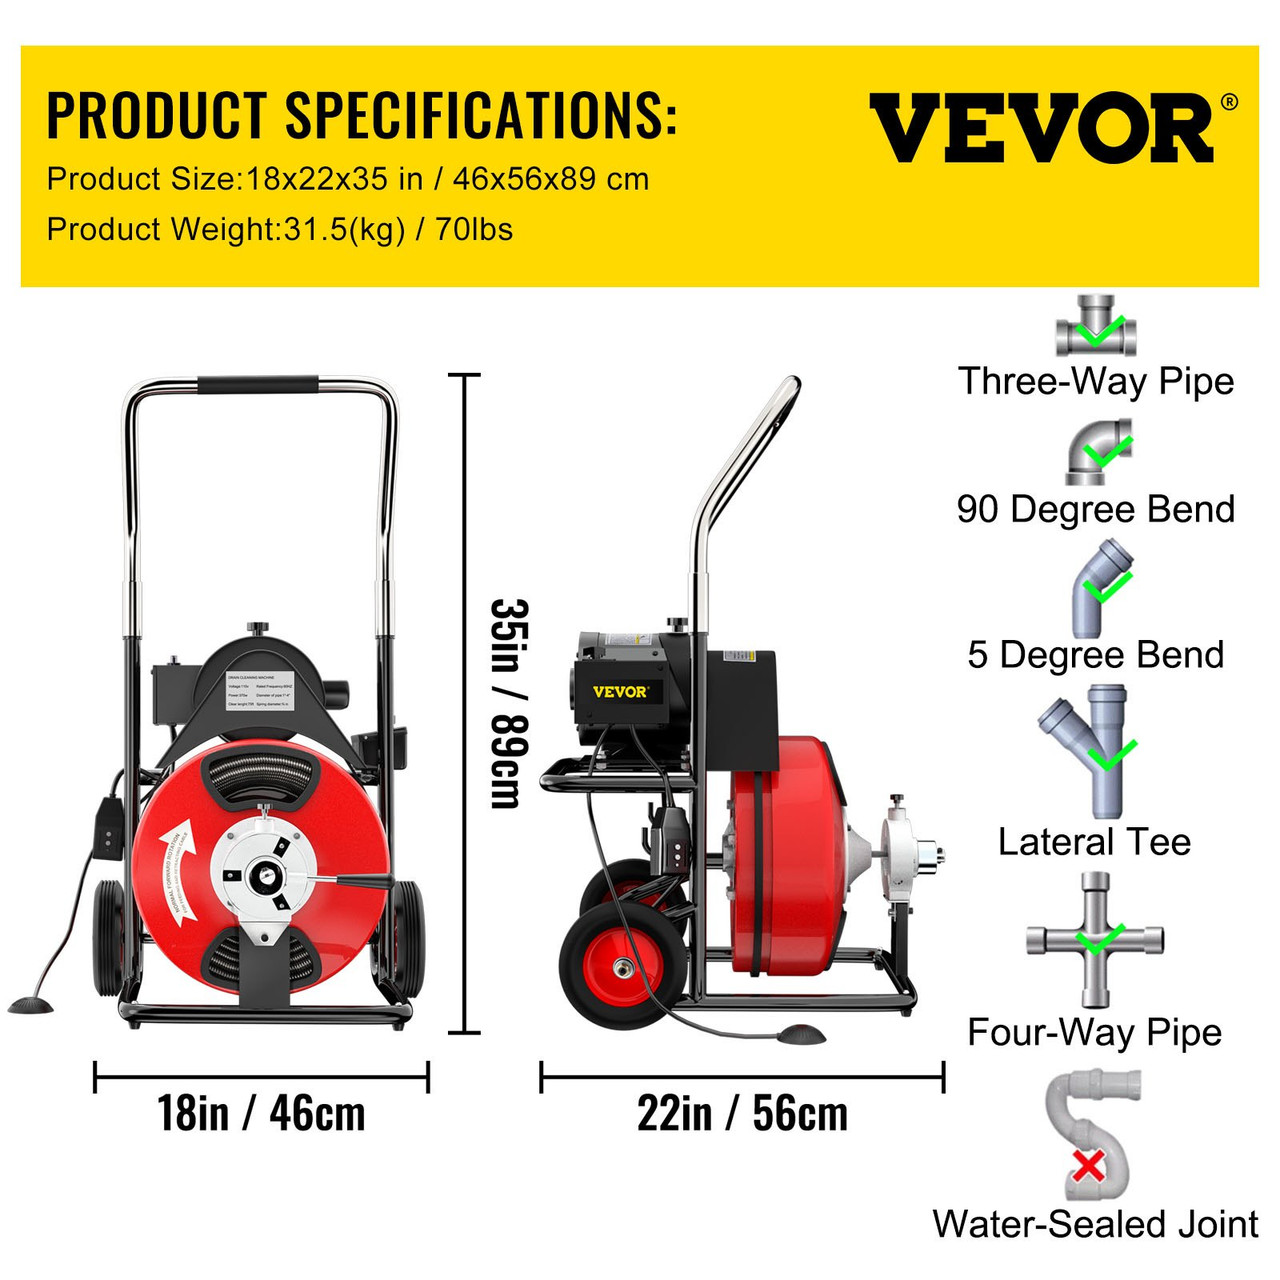 75Ft x 3/8Inch Drain Cleaner Machine fit 1-1/4 Inch (32mm) to 4 Inch(100mm) Pipes 370W Drain Cleaning Machine Portable Electric Drain Auger with 2 Sets of Cutters Electric Drain Auger